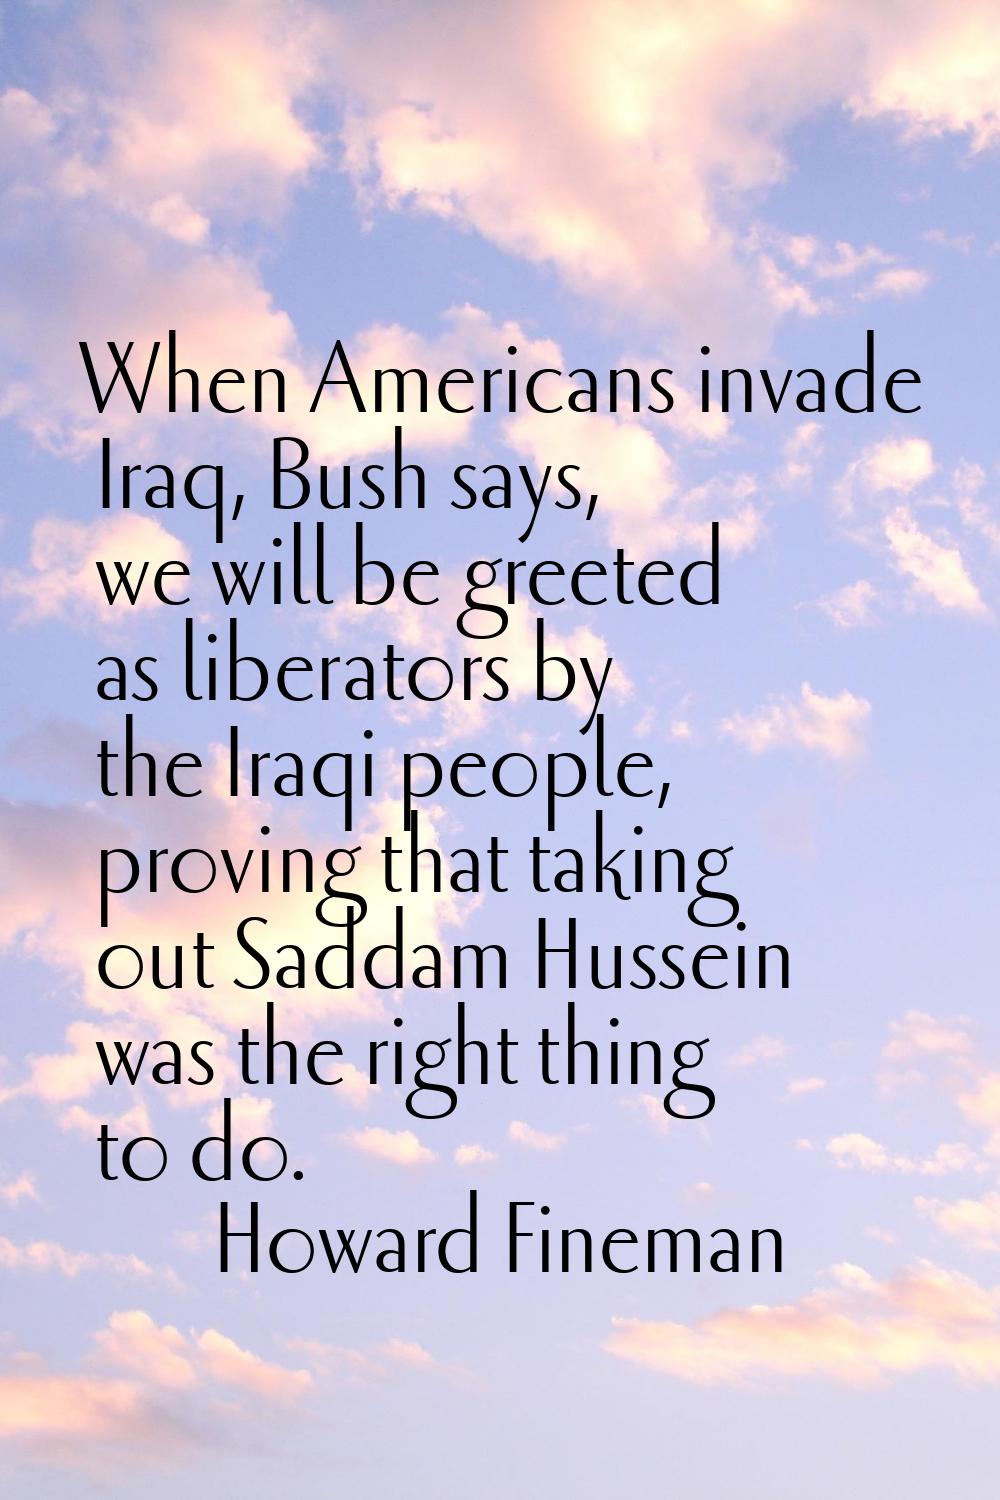 When Americans invade Iraq, Bush says, we will be greeted as liberators by the Iraqi people, provin